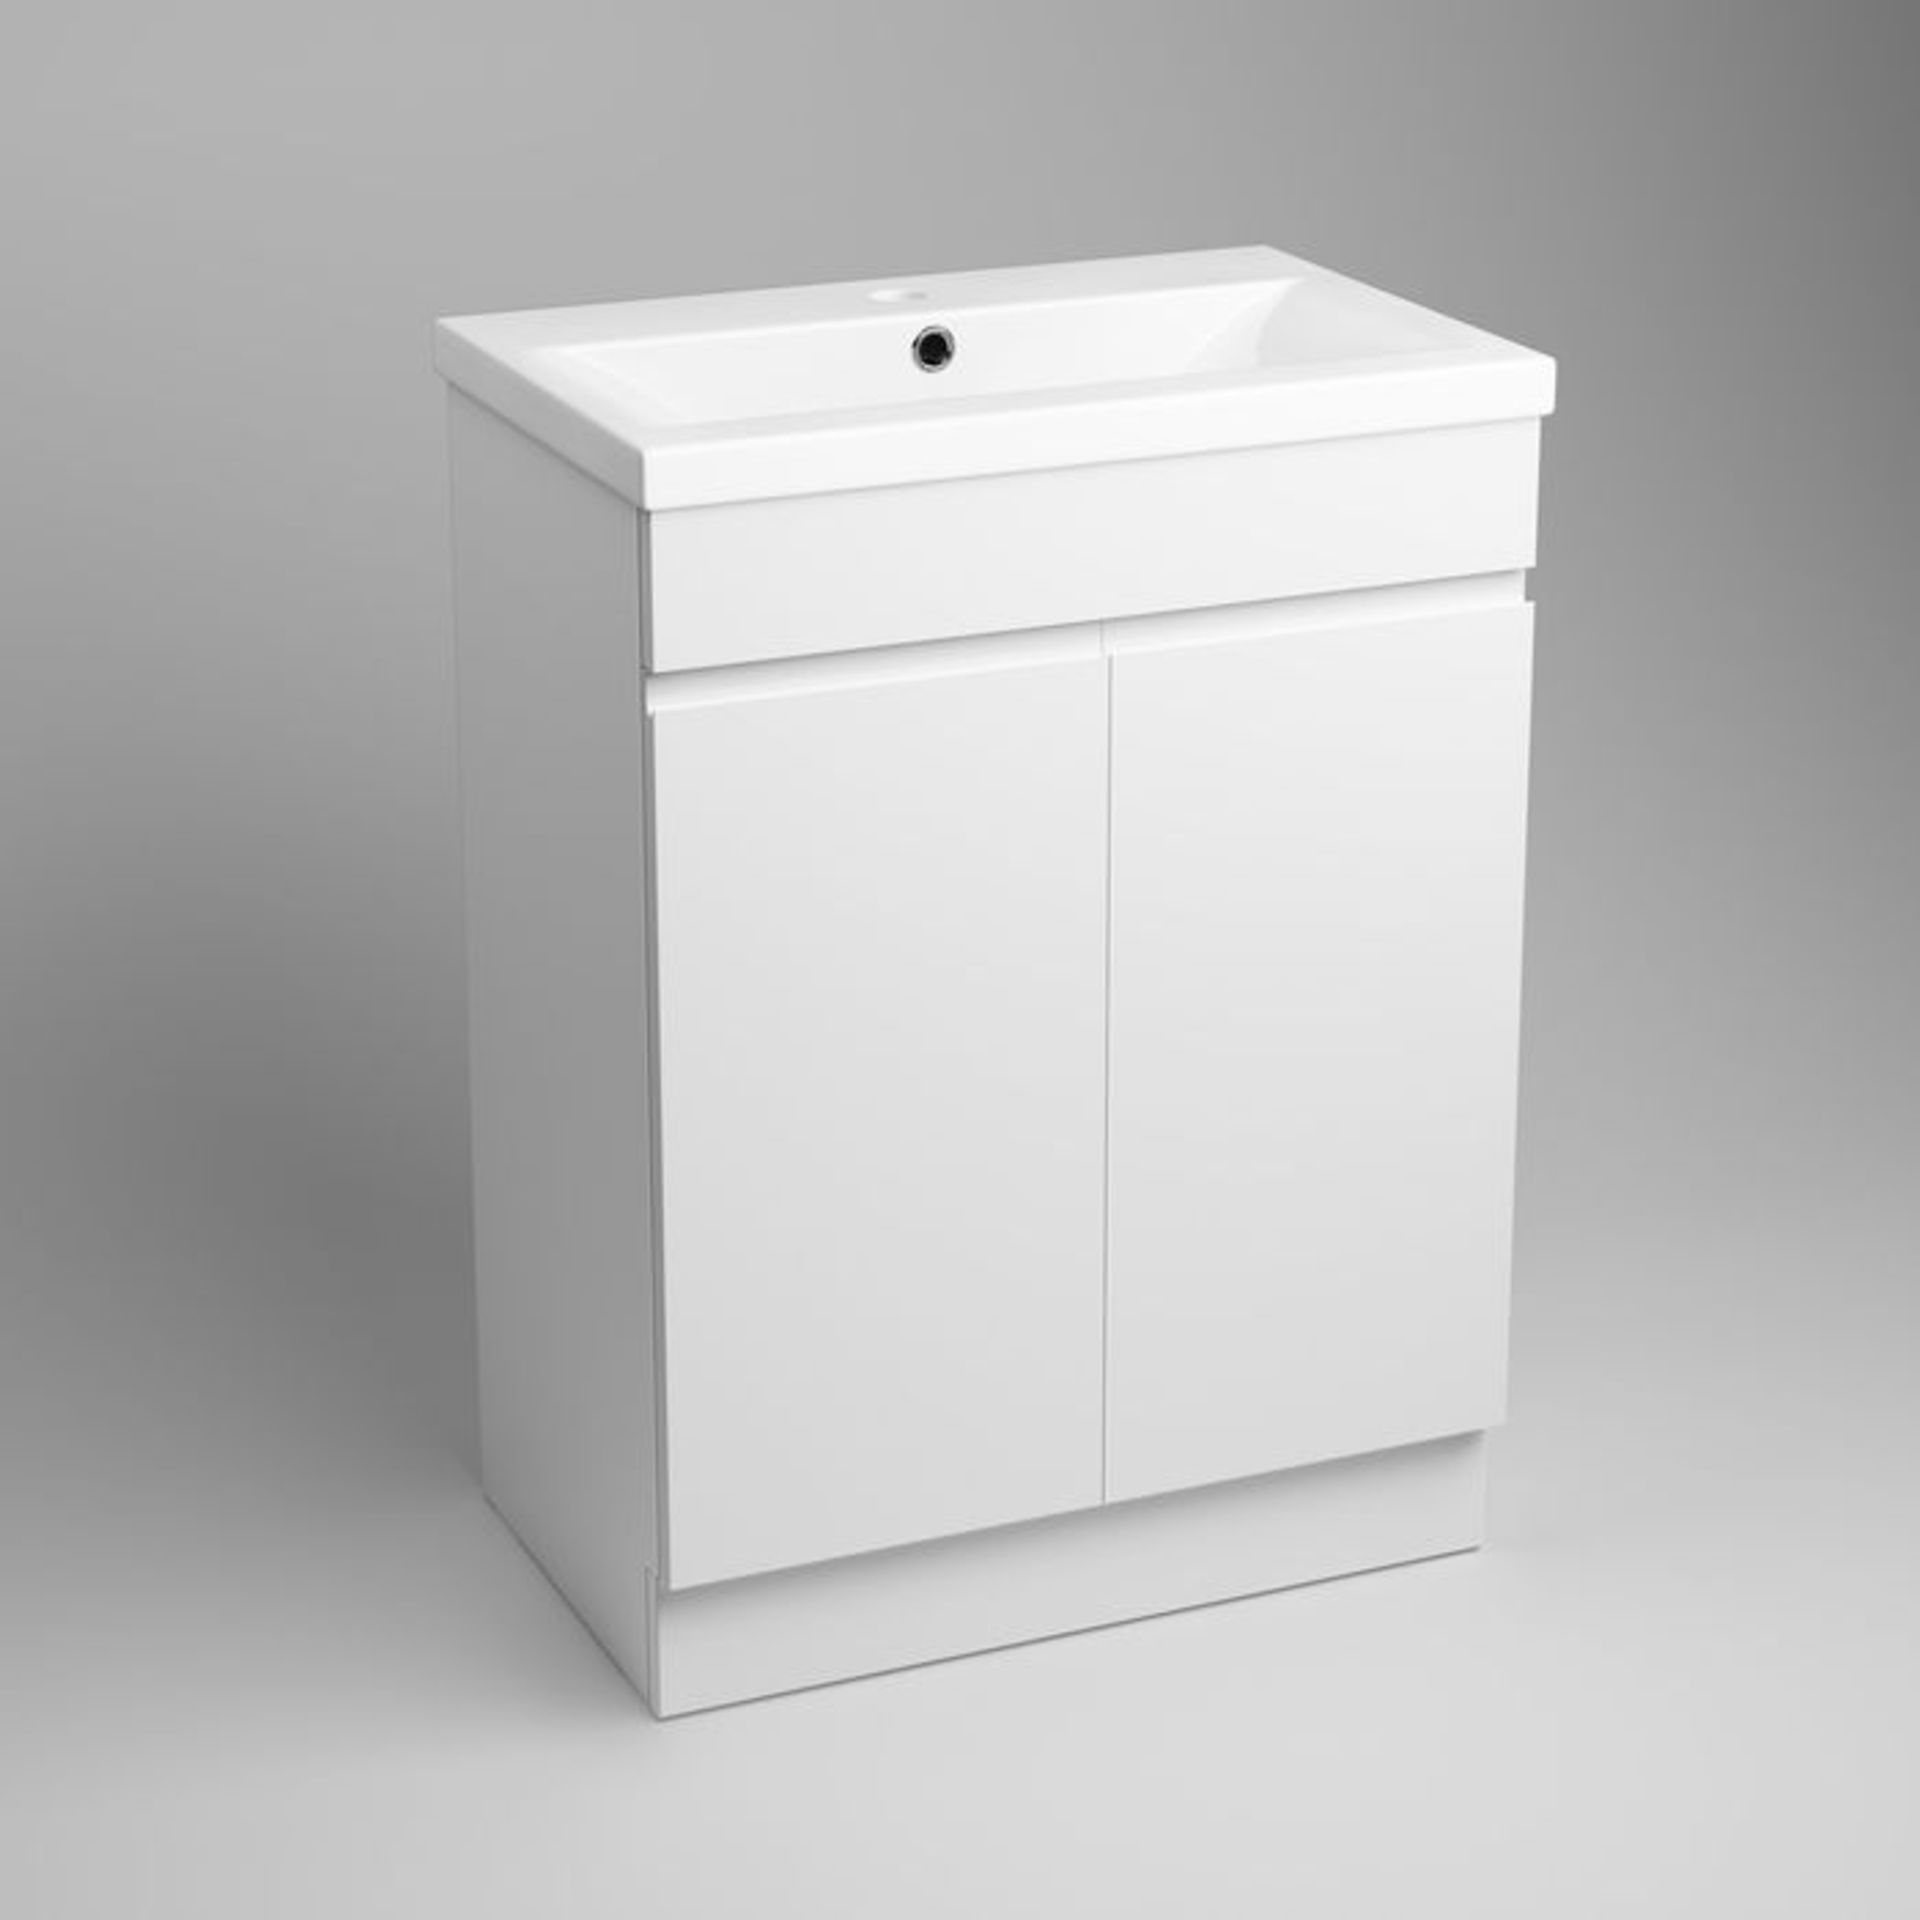 NEW & BOXED 600mm Trent Gloss White Sink Cabinet - Floor Standing.RRP £499.99.Comes complete w... - Image 3 of 3